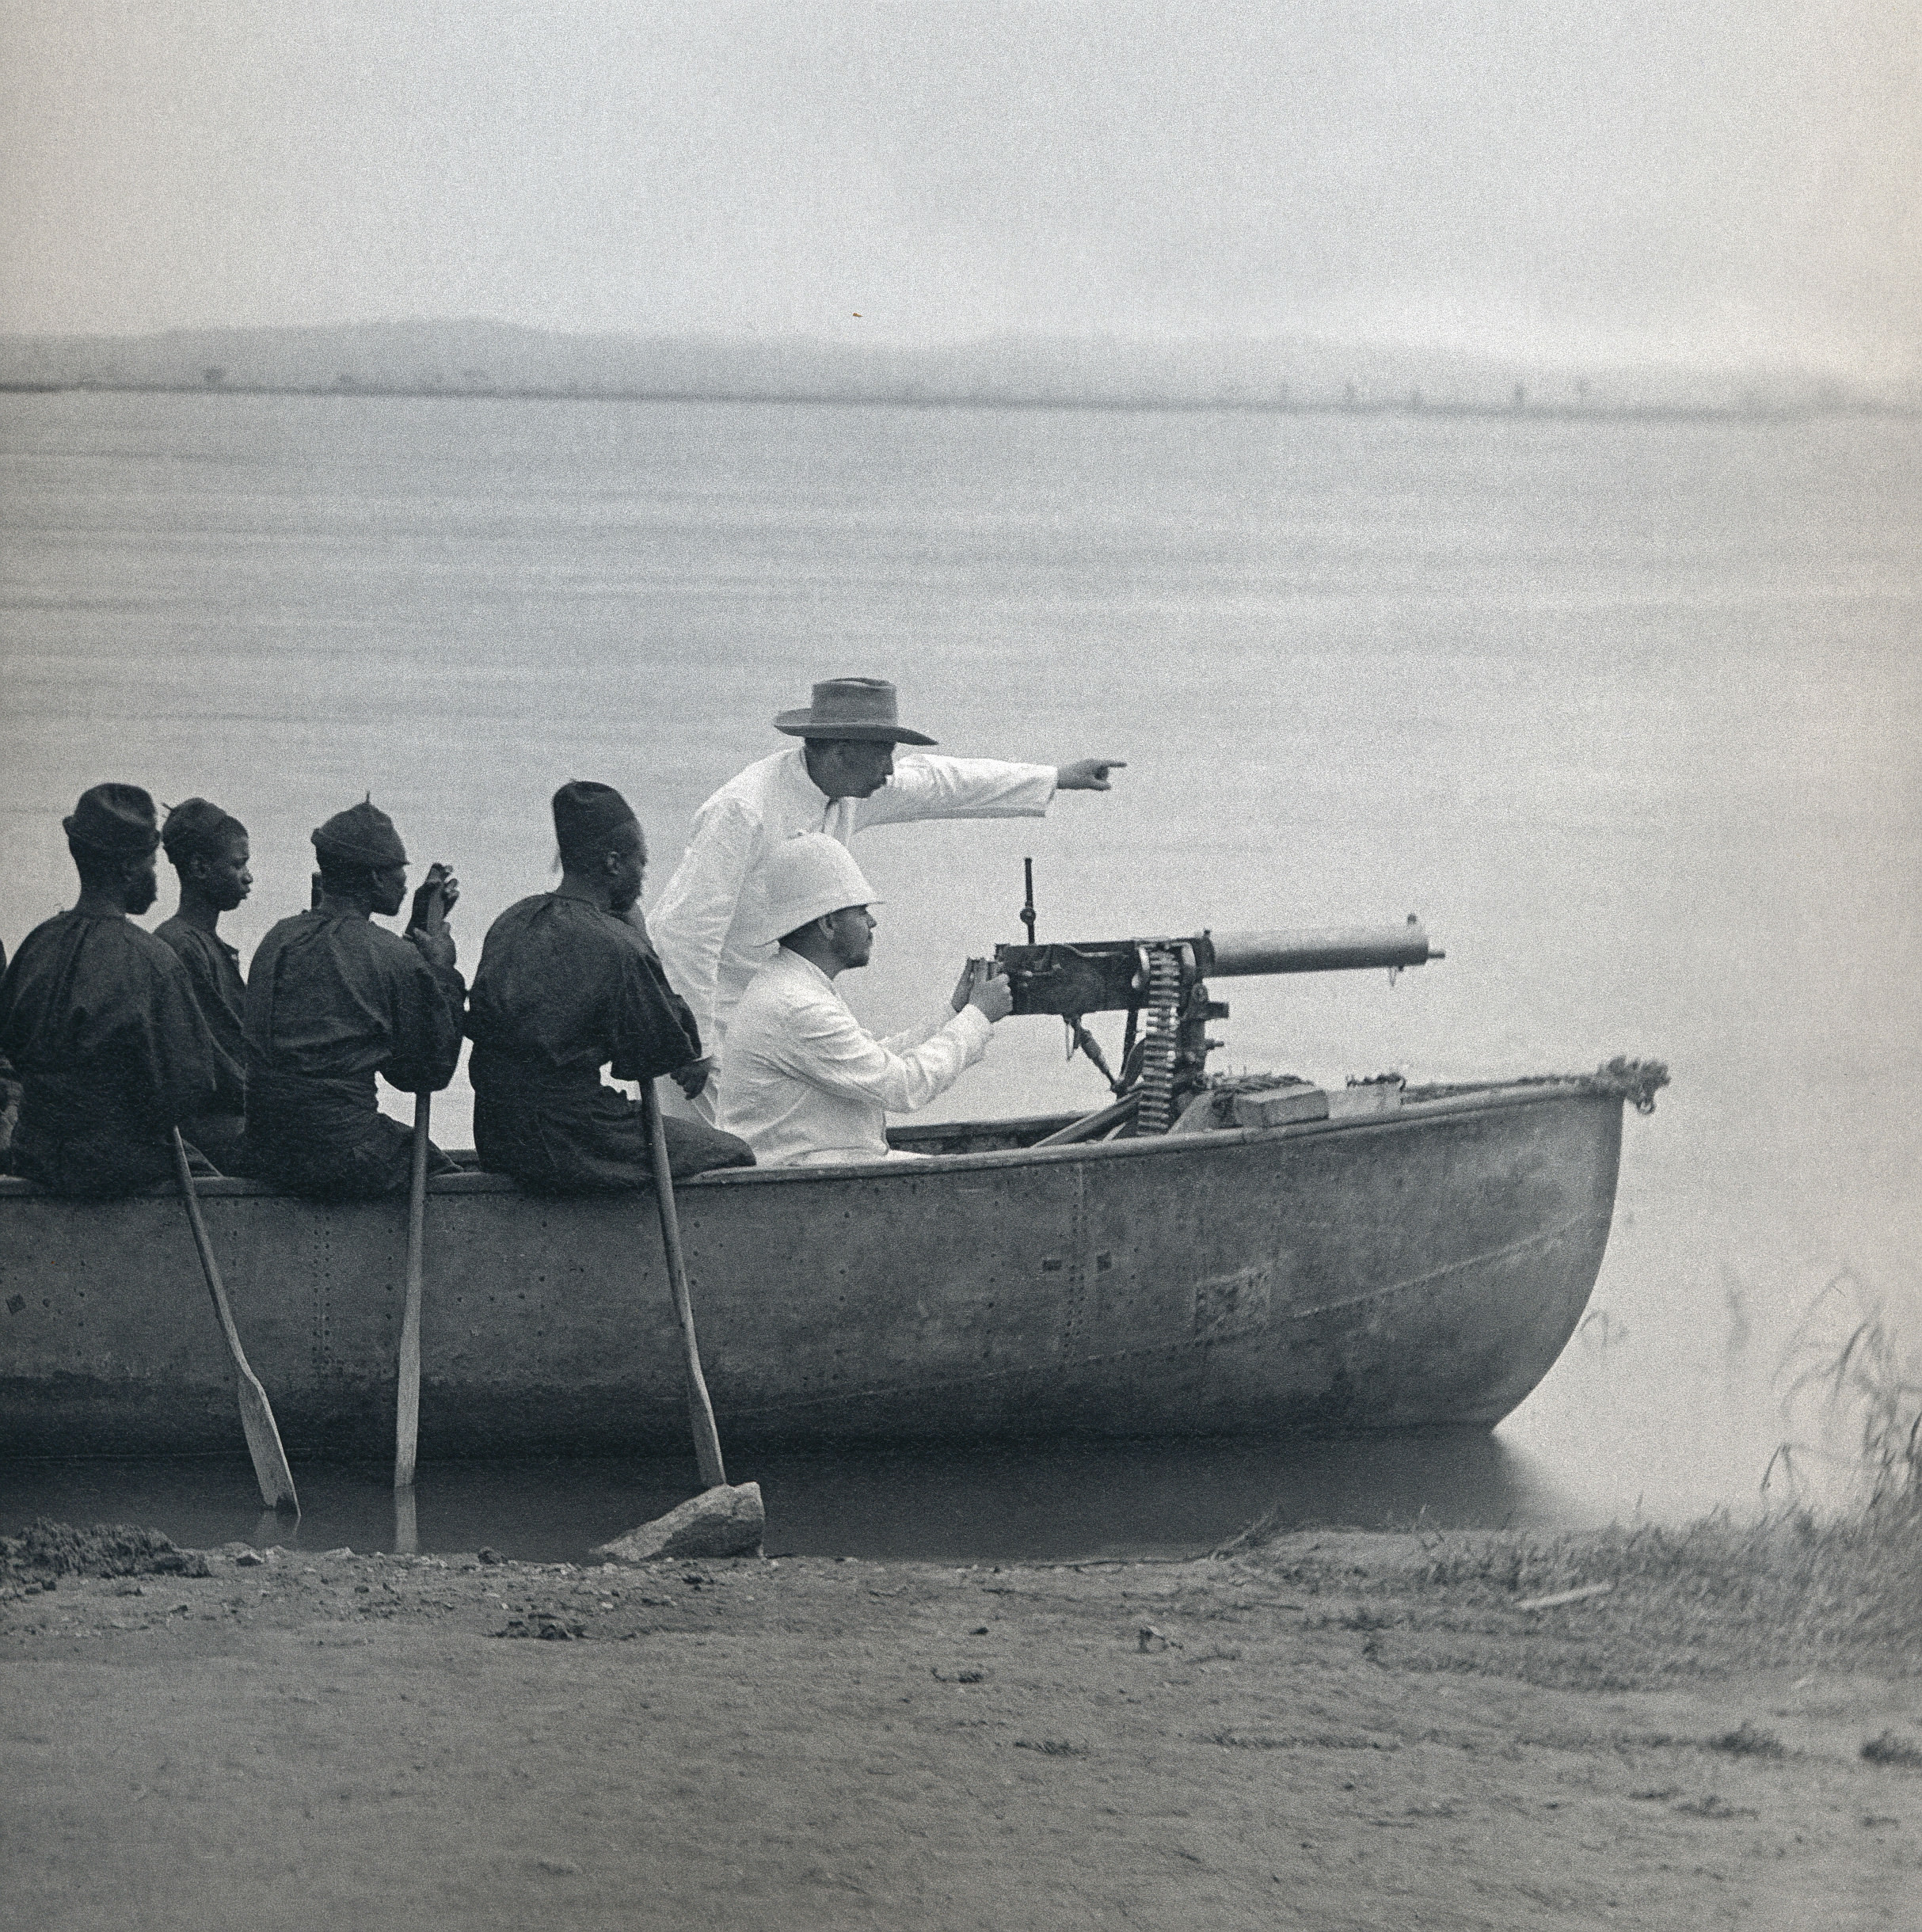 A colonial expedition force practicing how to react to threats in the Belgian Congo in 1900.